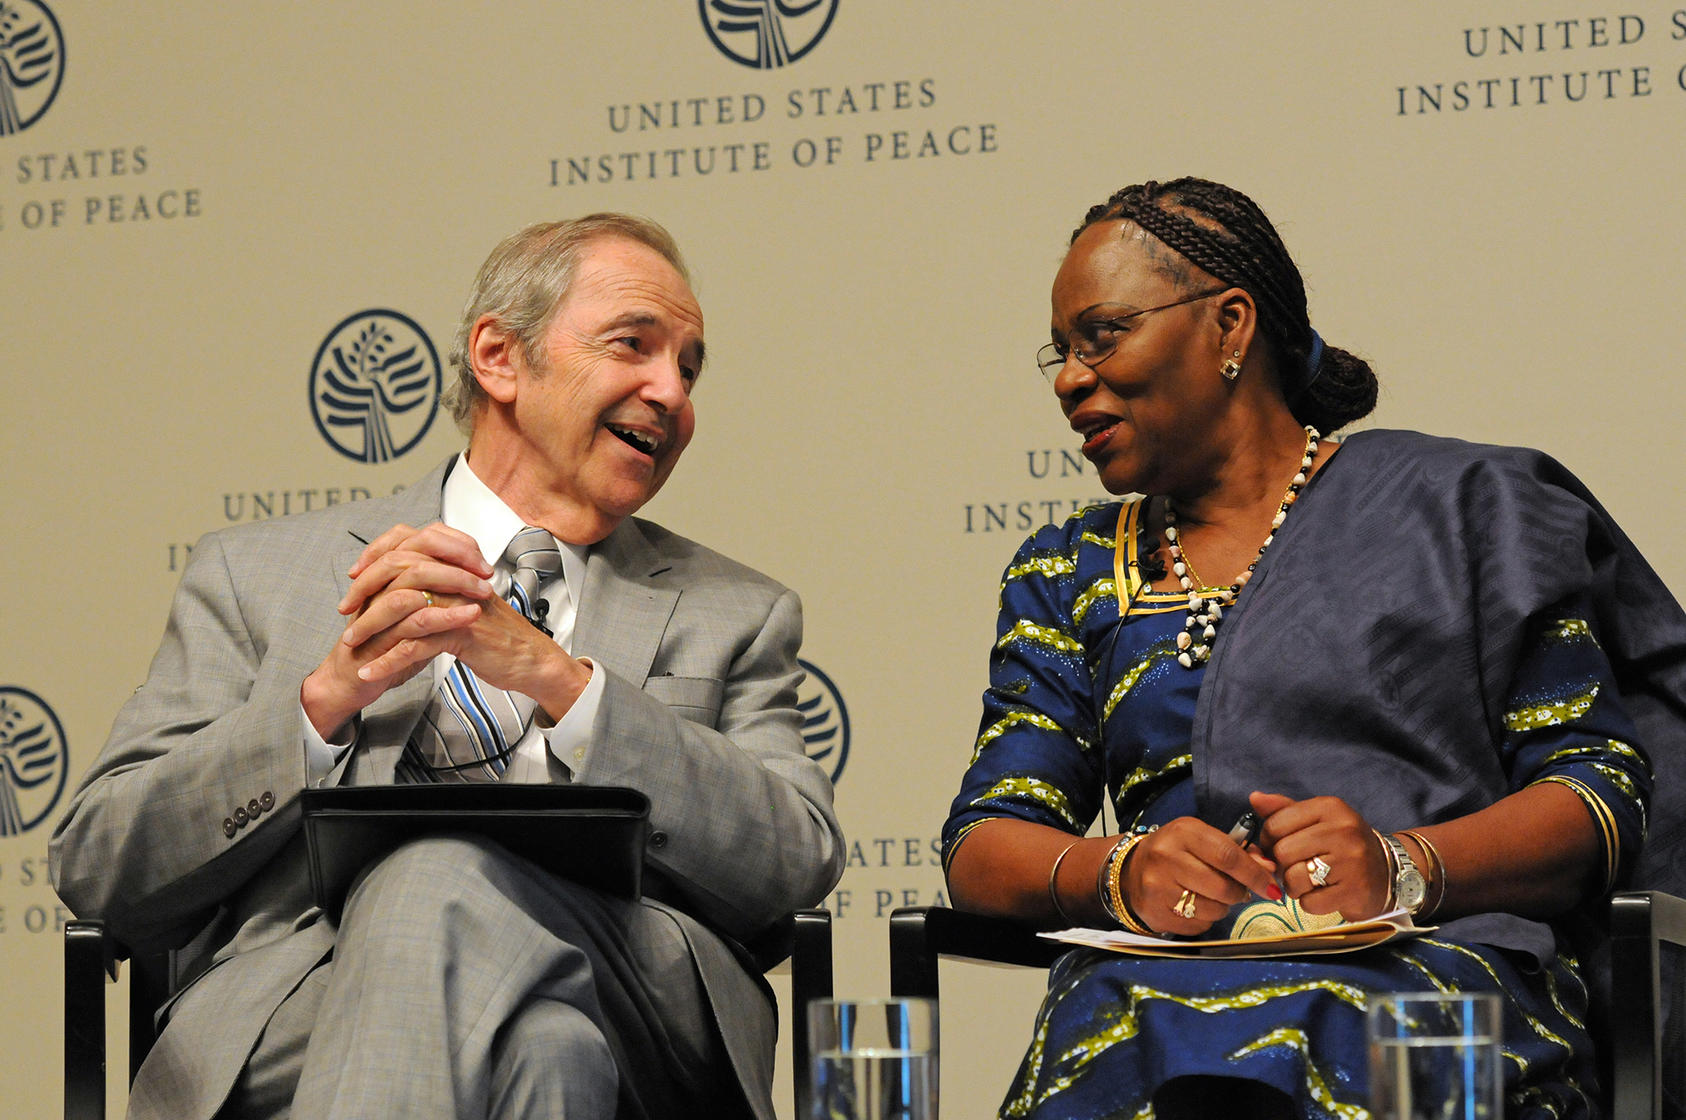 Ambassador Lyman and former Mozambique Ambassador to the U.S. H.E. Amélia Matos Sumbana at a USIP event on the role of women’s leadership in peacemaking and development in Africa, May 26, 2015.